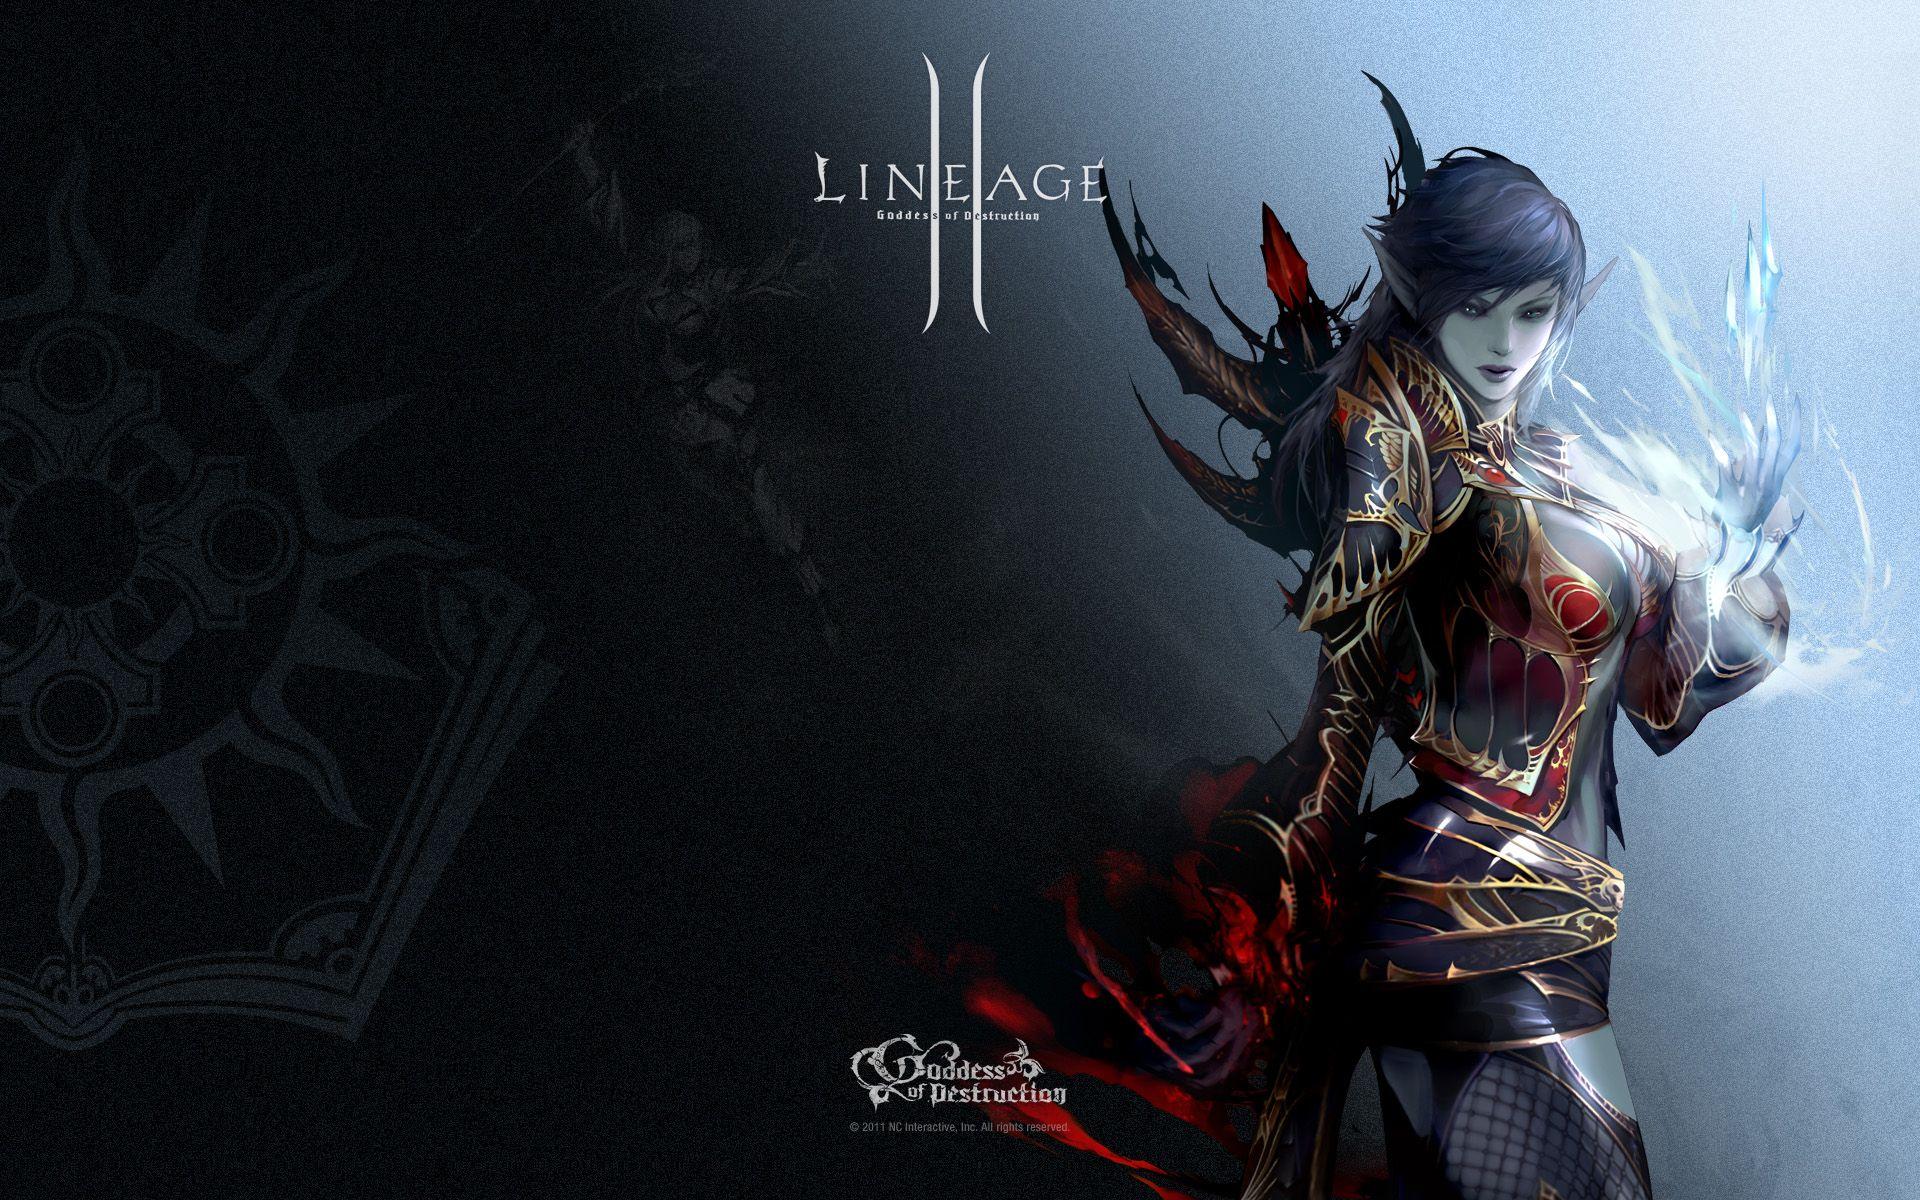 Lineage 2 Wizard